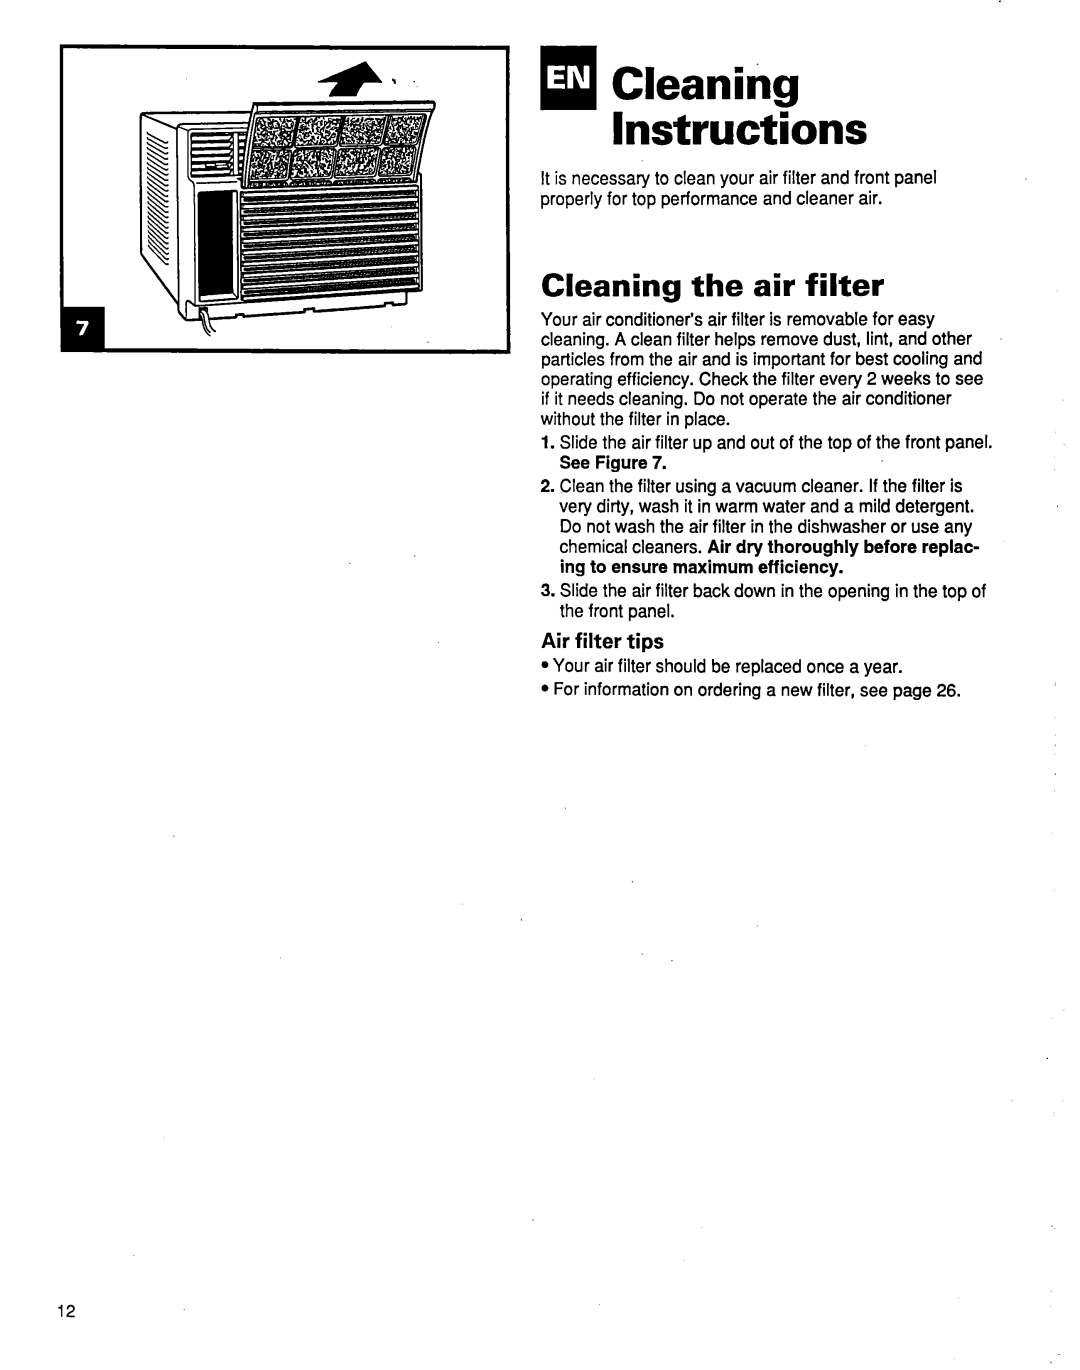 Whirlpool ACM184XE1 manual HICleaning Instructions, Cleaning the air filter, Air filter tips 